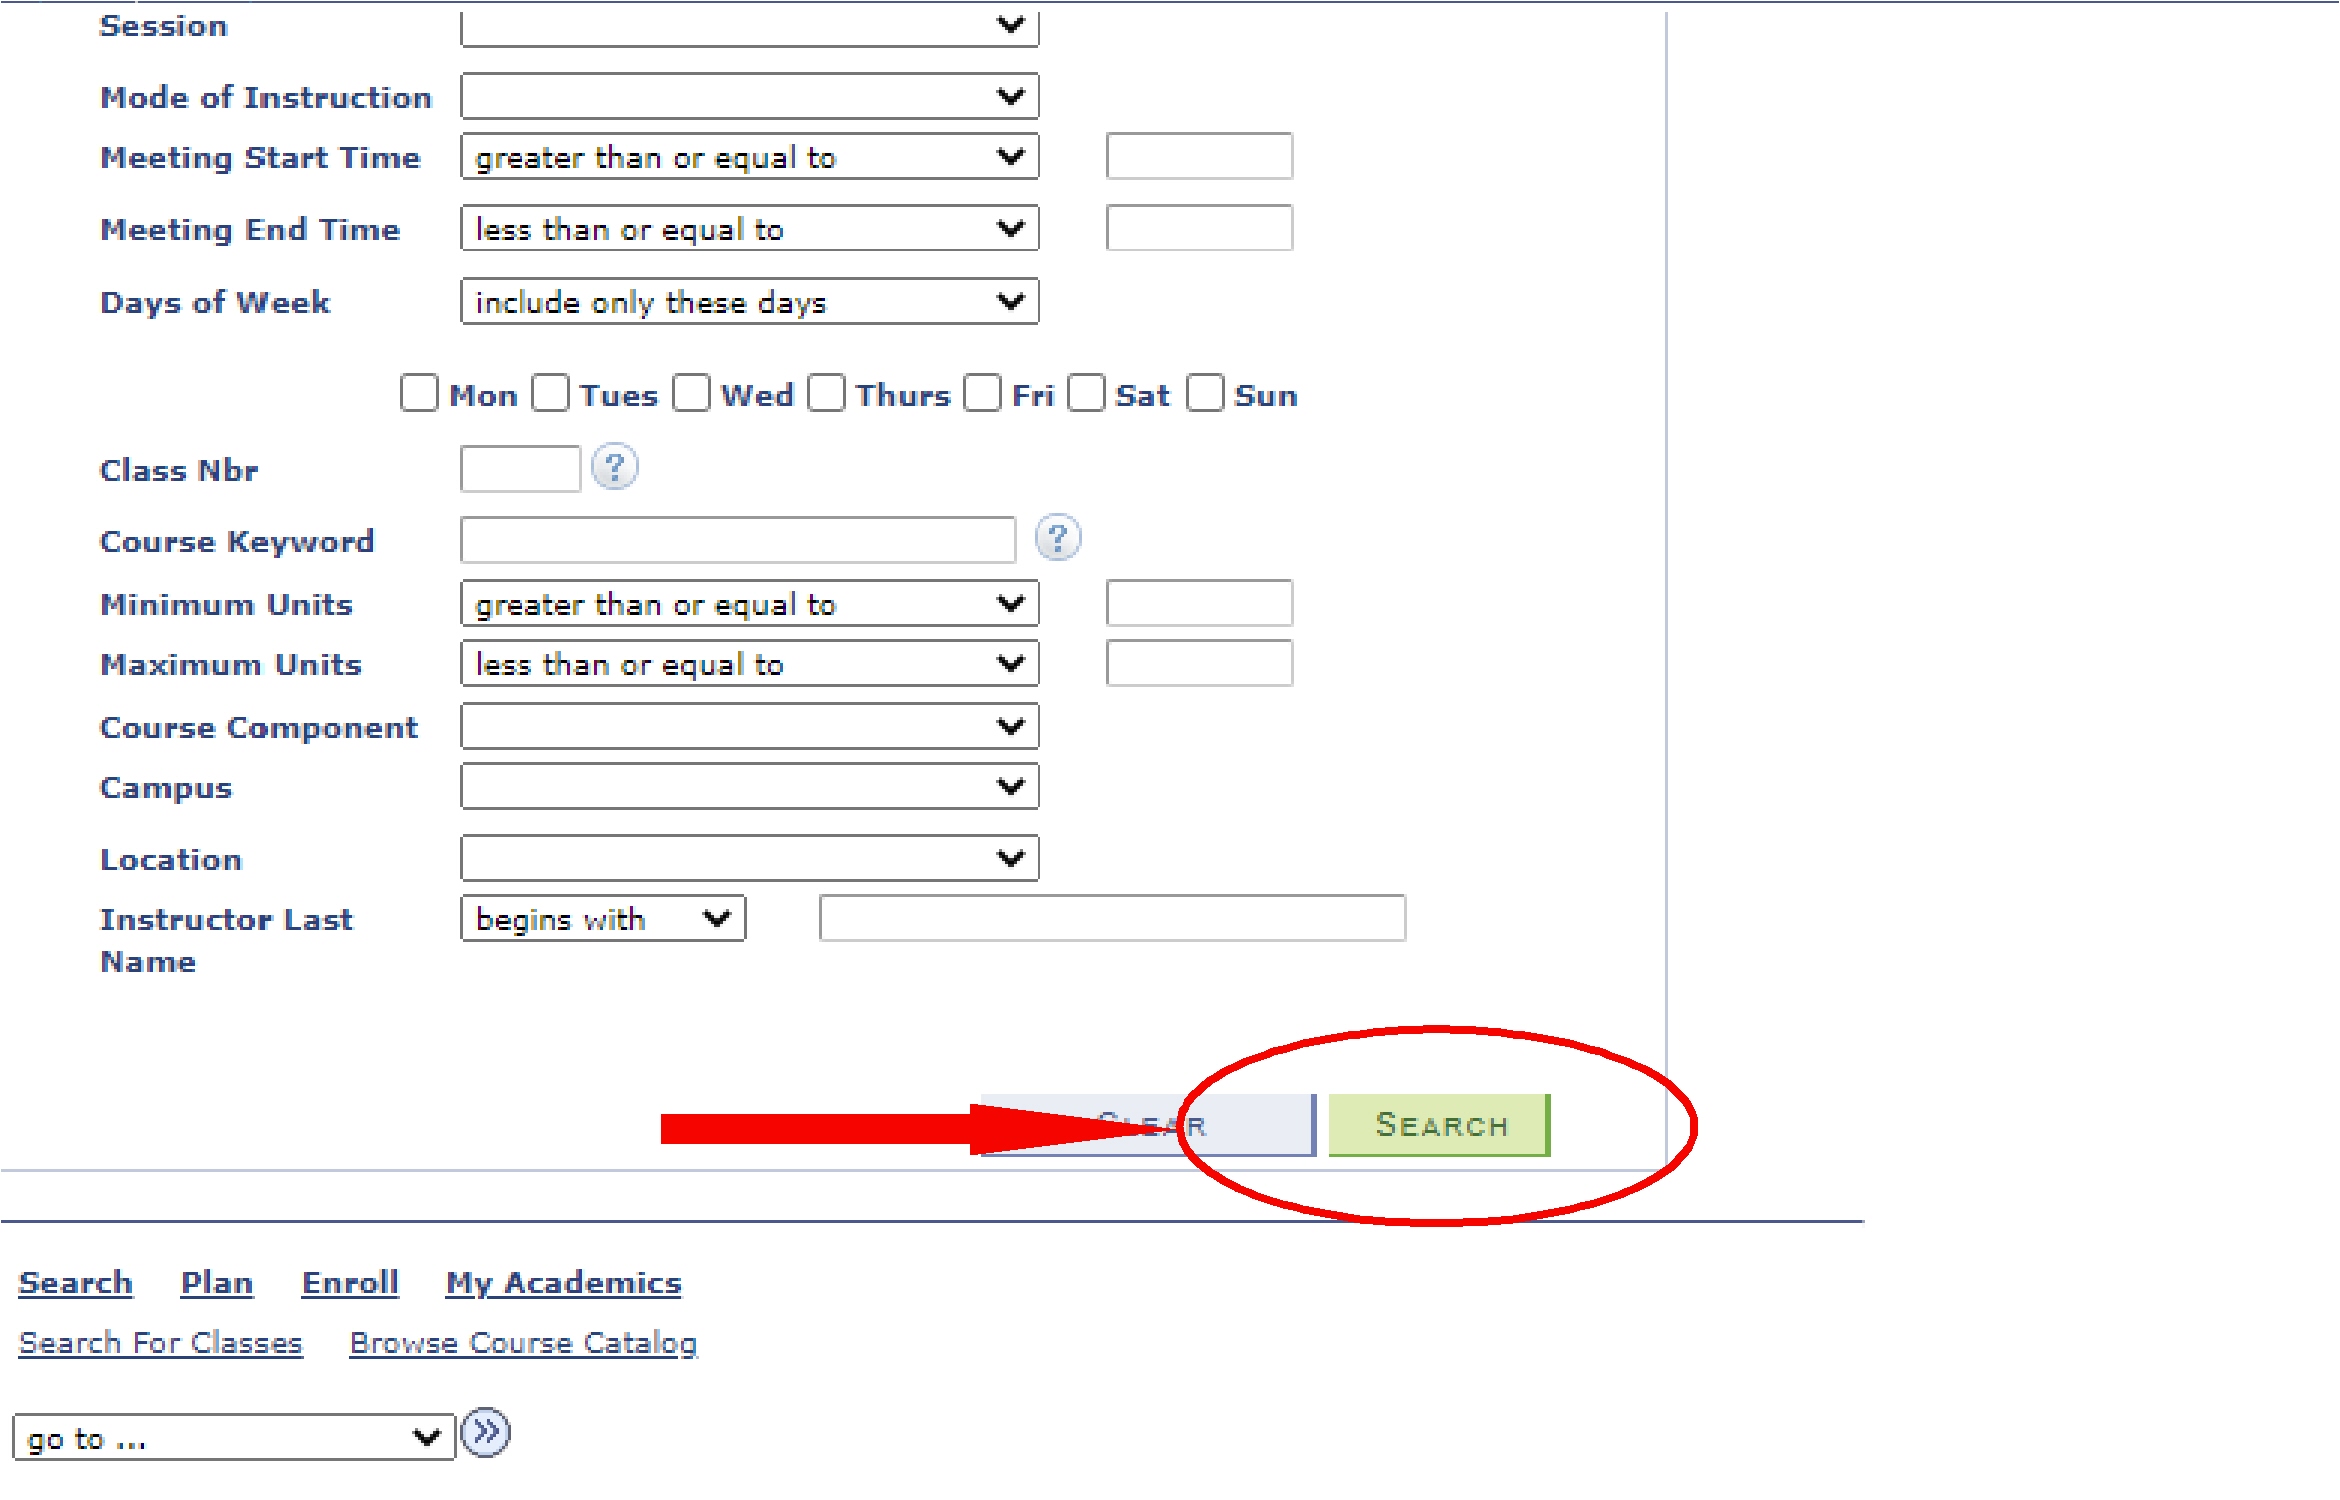 Submit button location with arrow overlay pointing to the button.